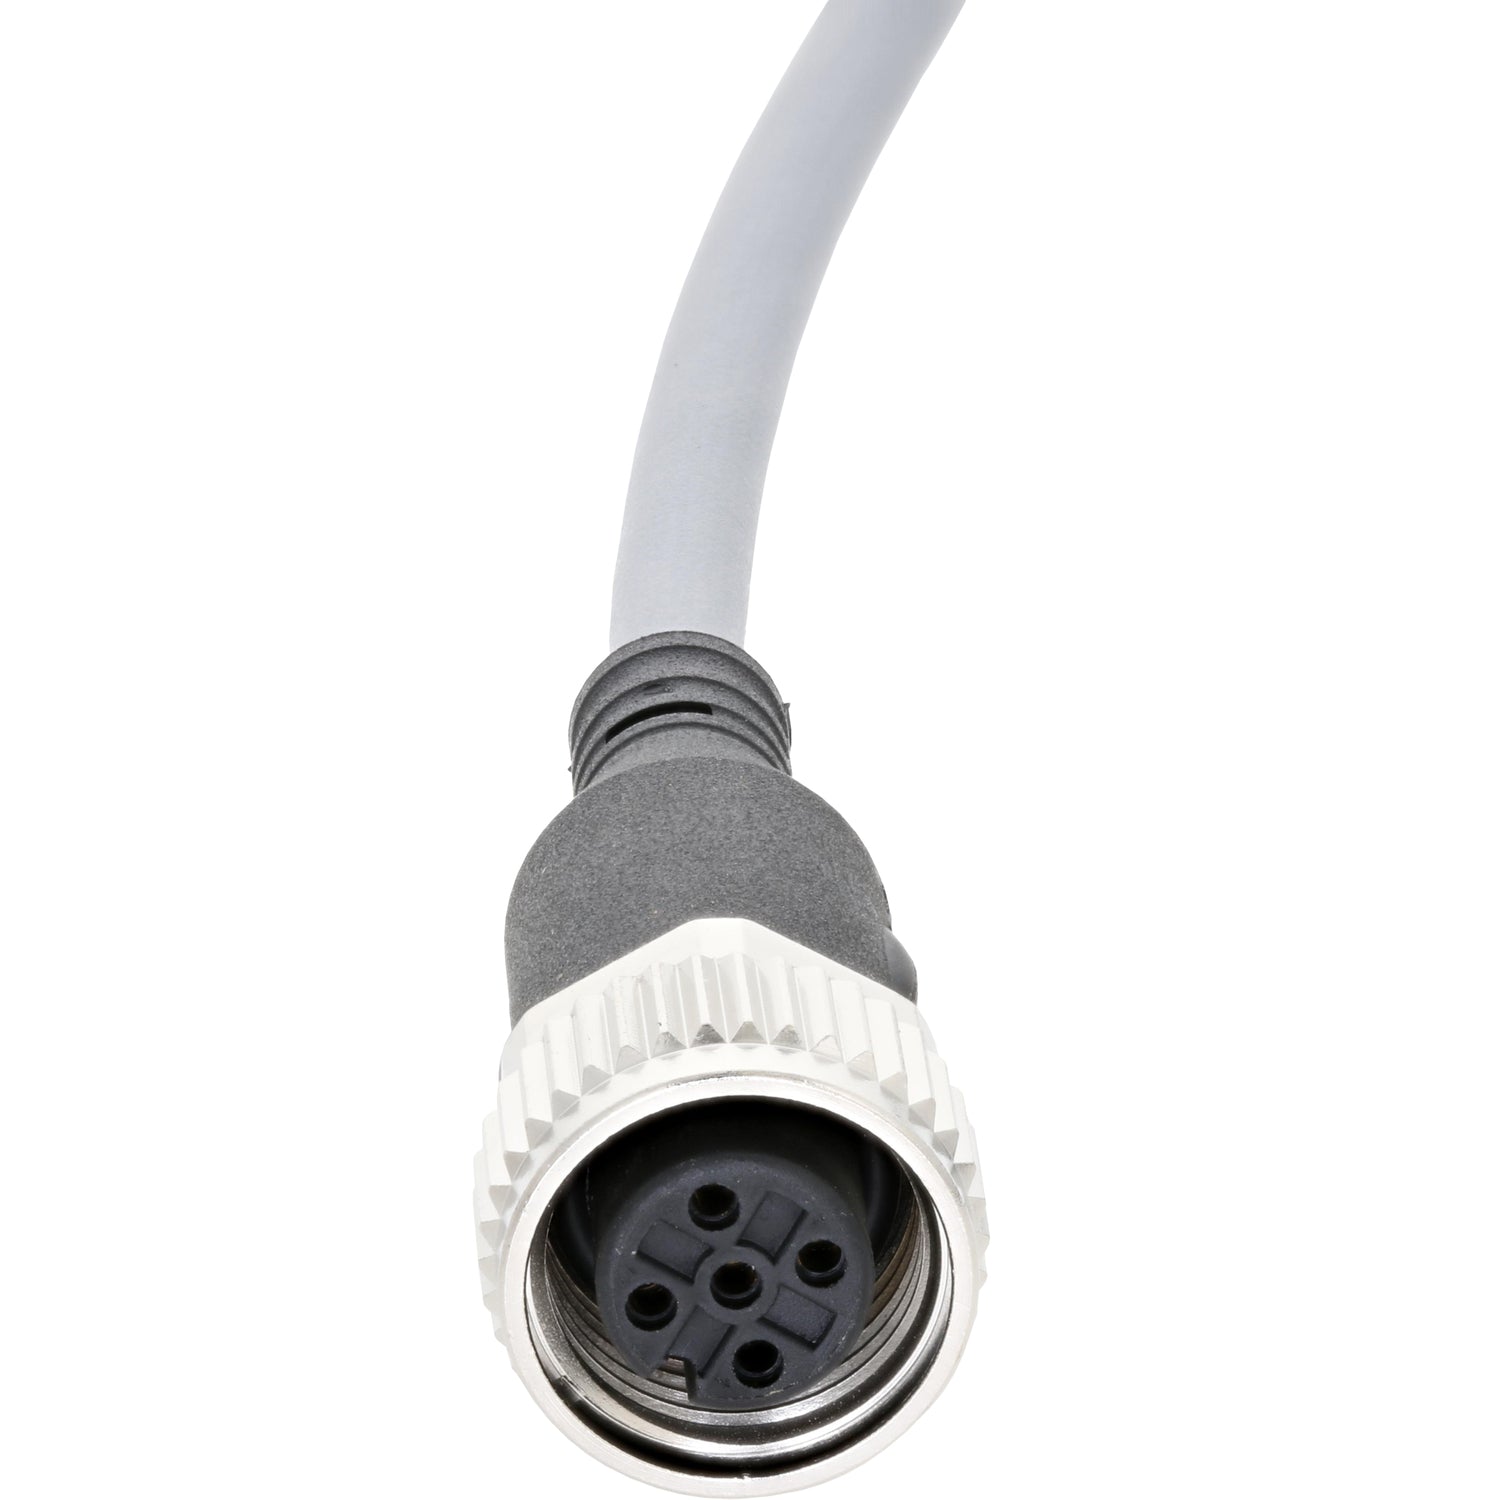 Grey connecting cable with a straight molded end on the other. Cable shown on white background.. 